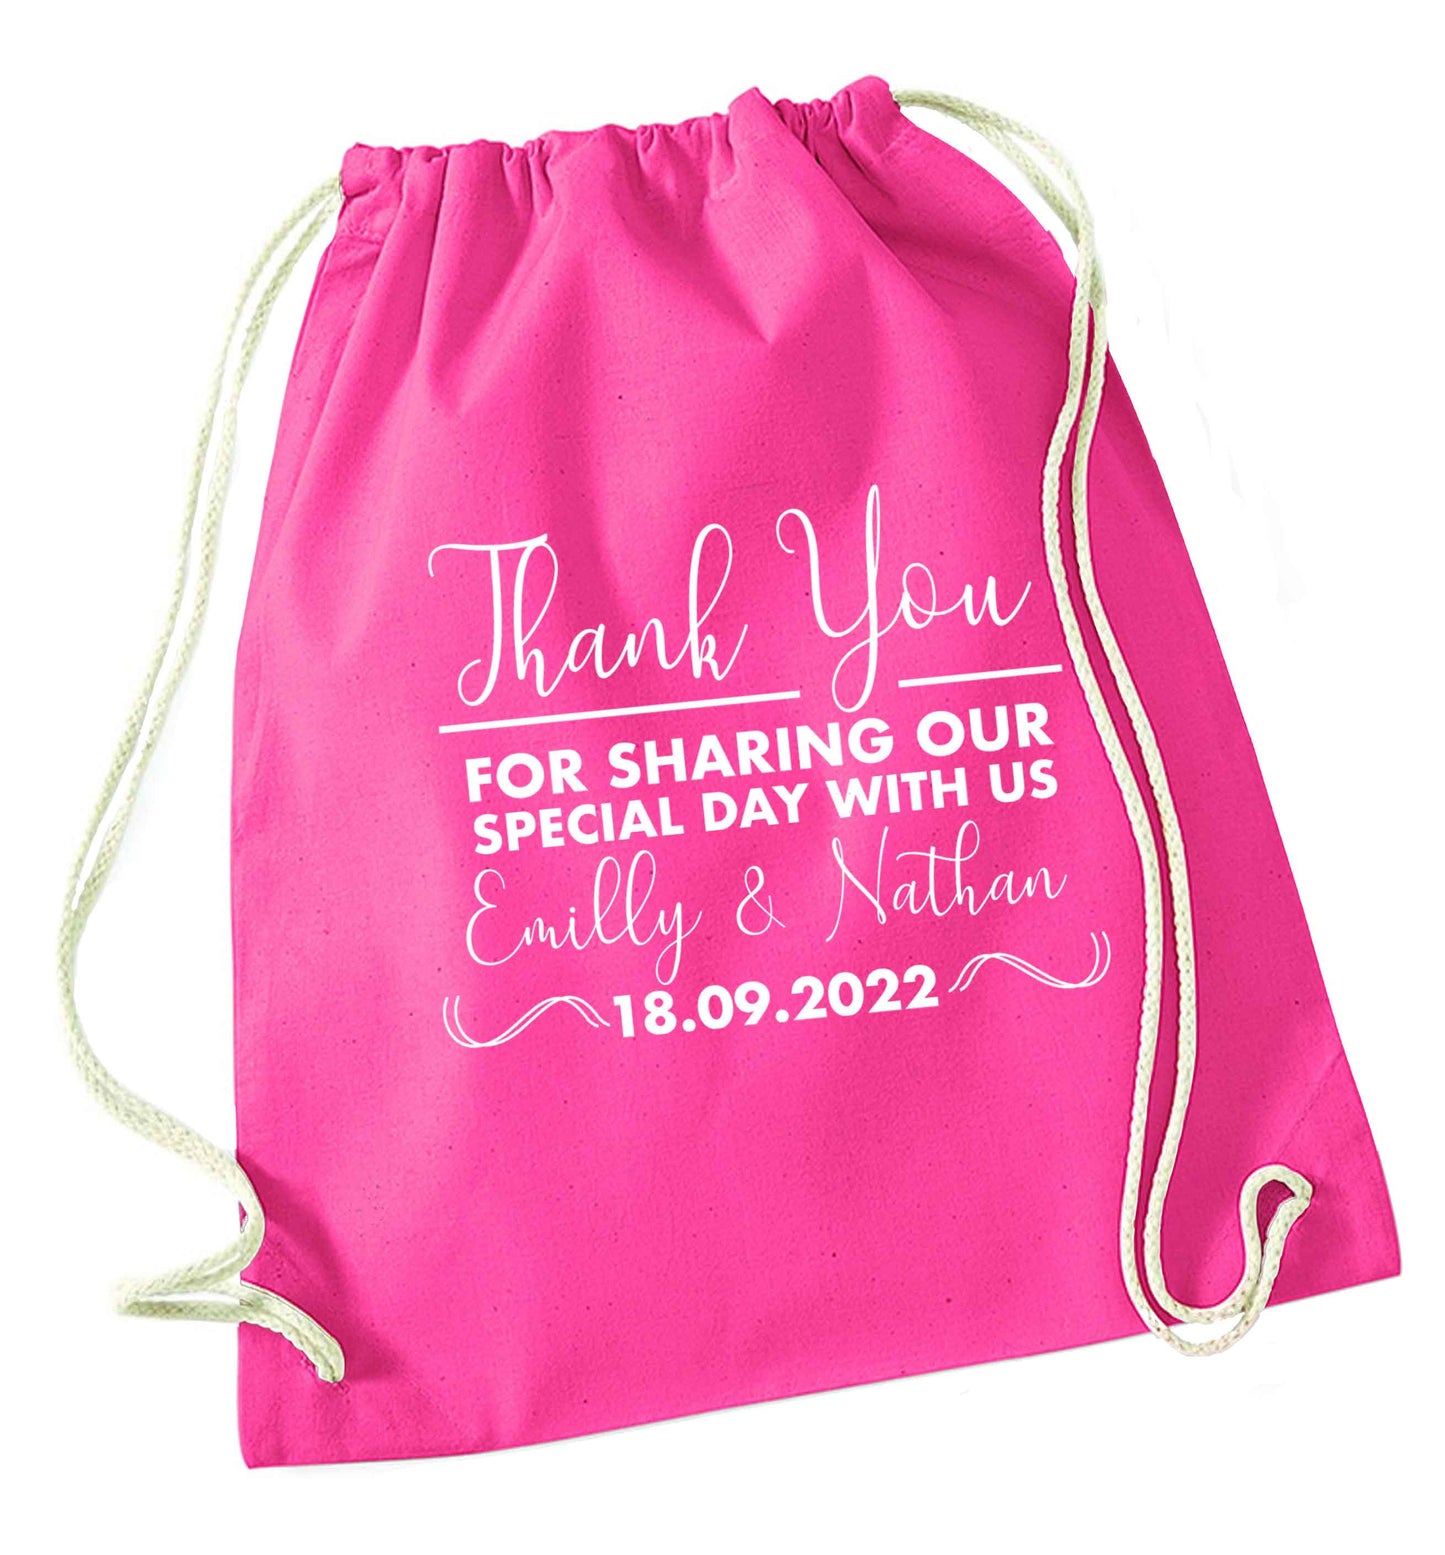 Gorgeous personalised and customisable wedding favour gifts! pink drawstring bag